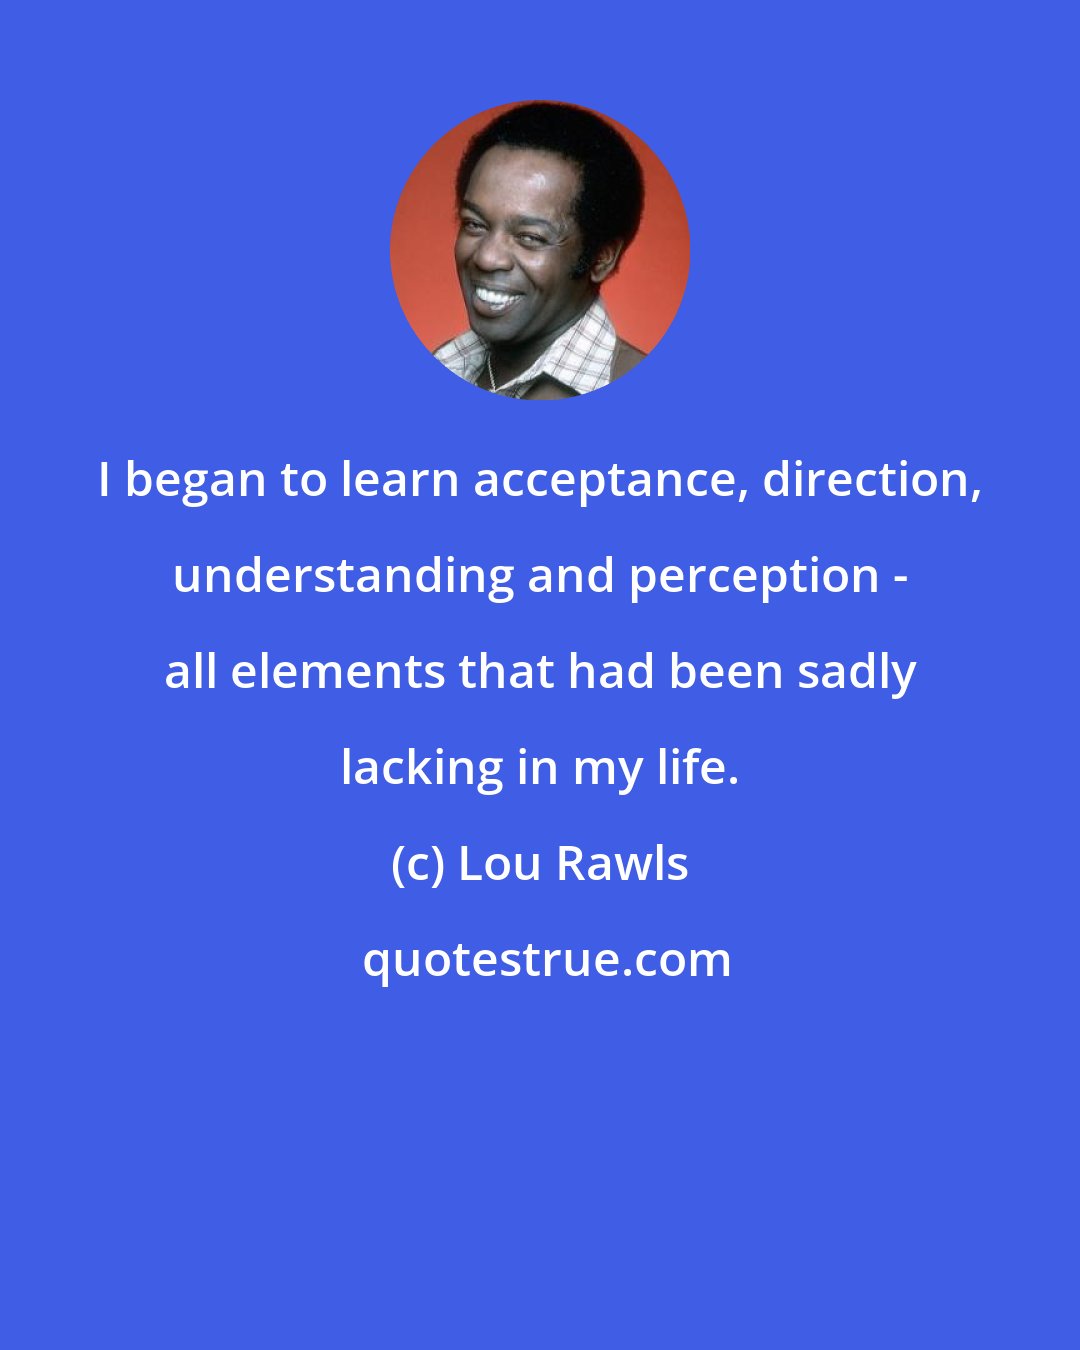 Lou Rawls: I began to learn acceptance, direction, understanding and perception - all elements that had been sadly lacking in my life.